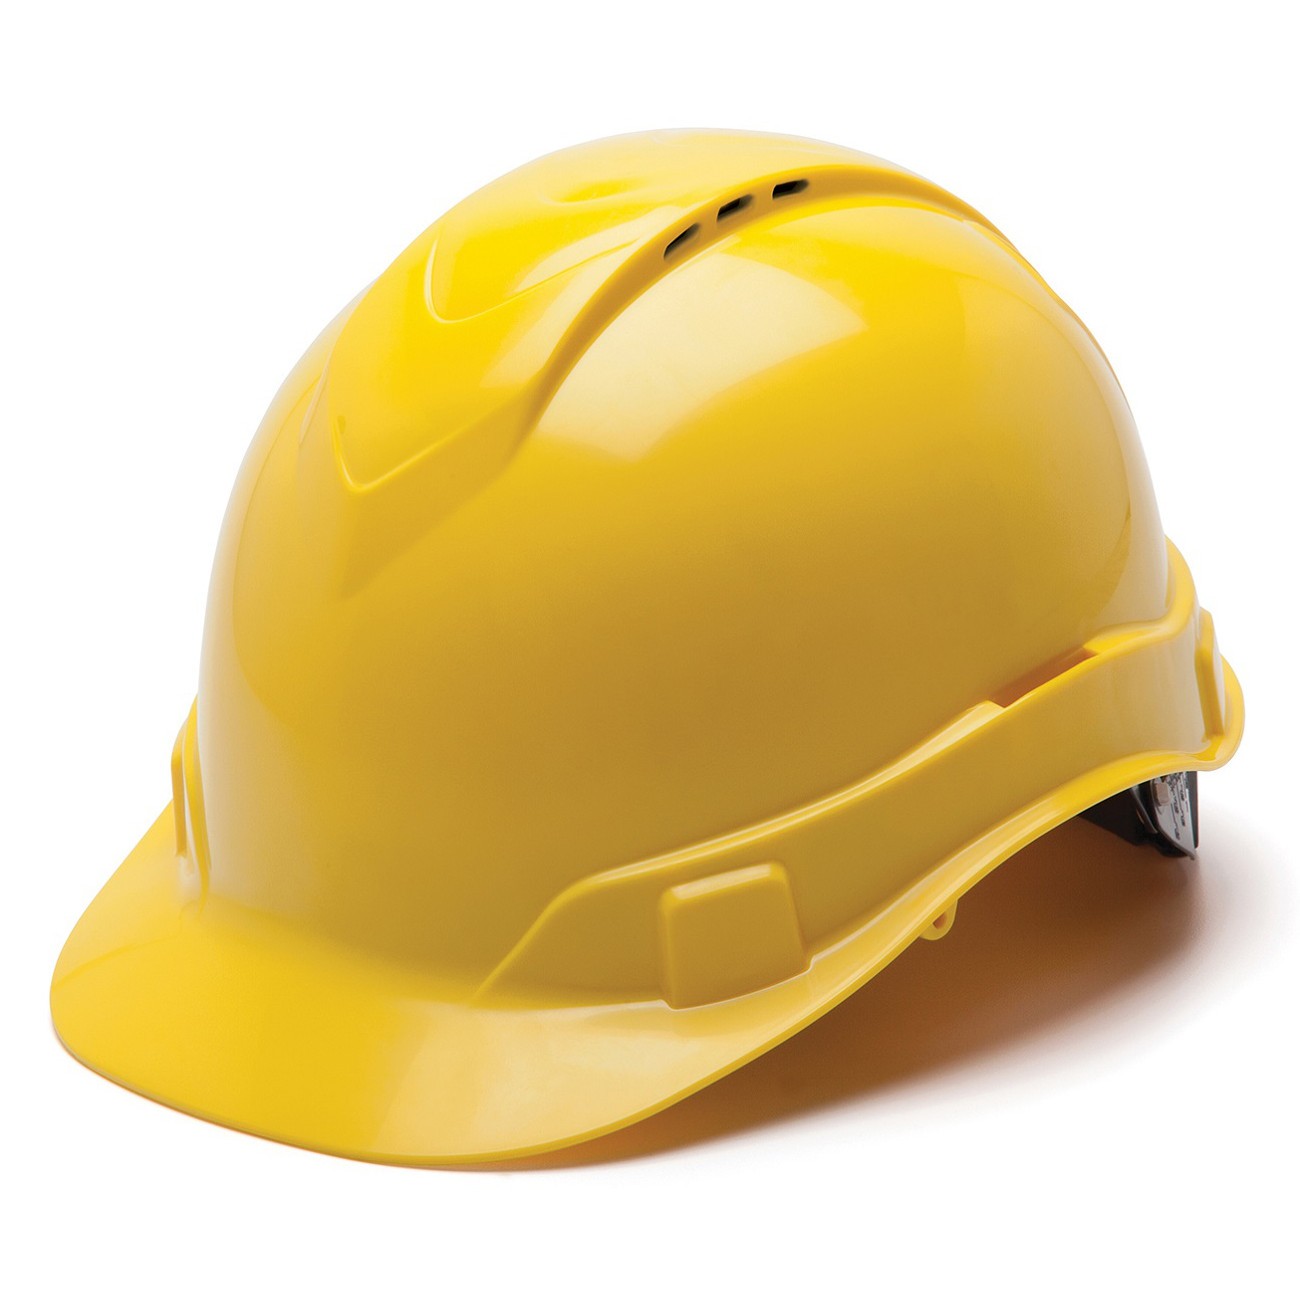 Pyramex Ridgeline Vented Cap Style Hard Hat with 4 Point Ratchet Suspension from Columbia Safety